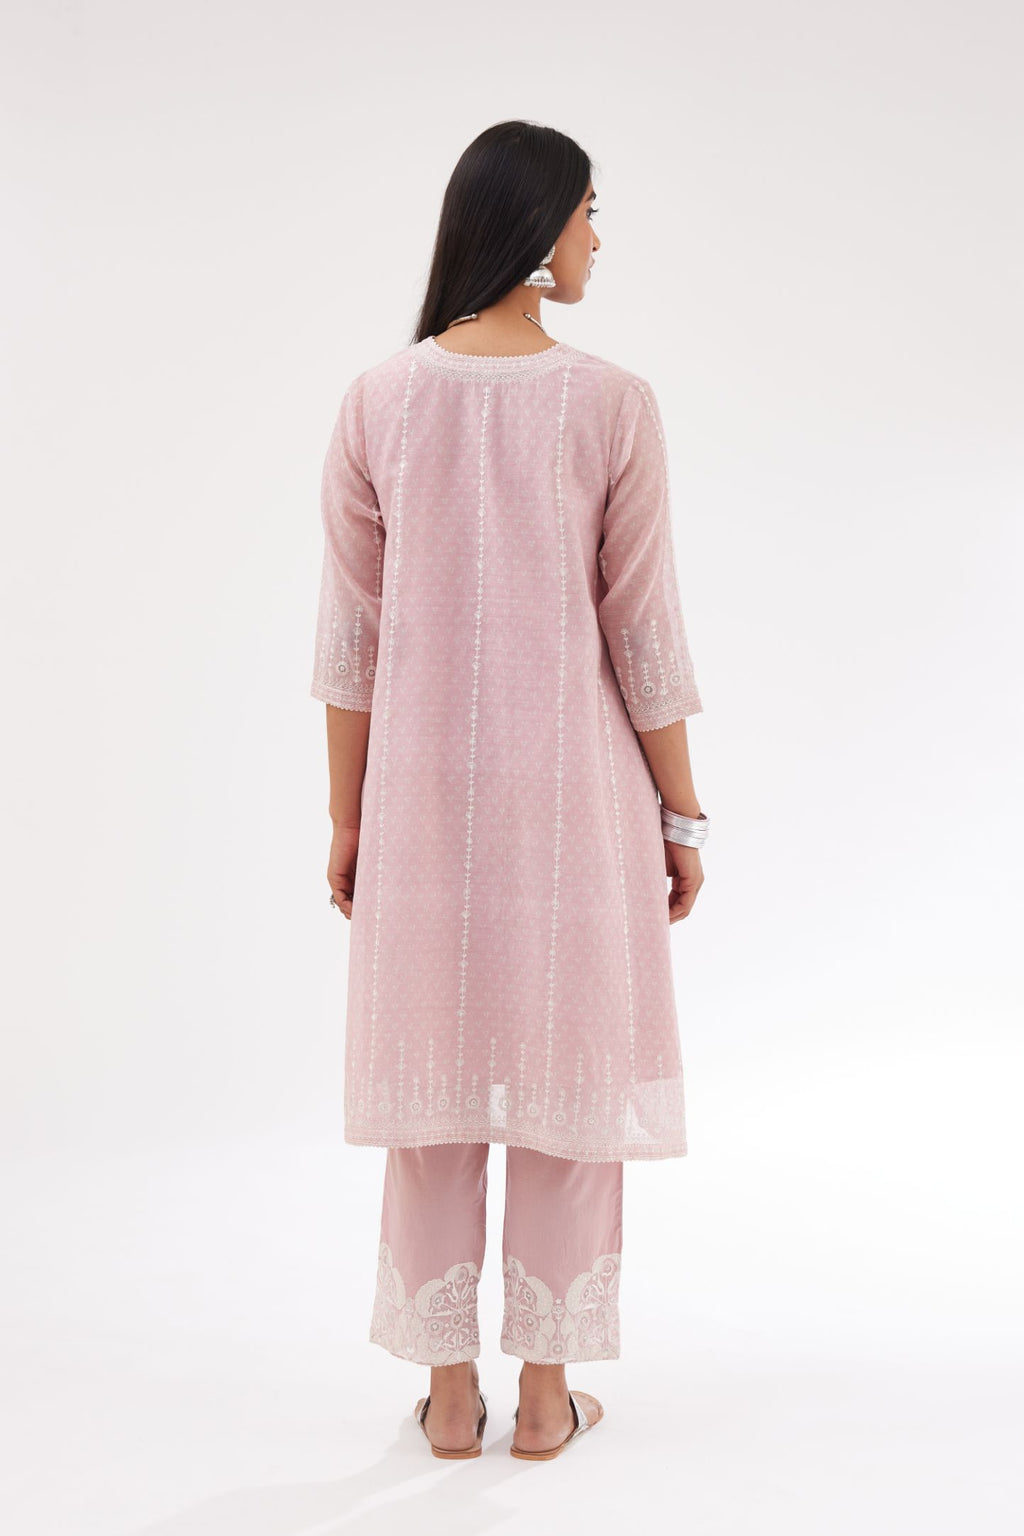 Pink hand block printed cotton chanderi A-line short kurta set with all over delicate dori and silk thread embroidery stripes.